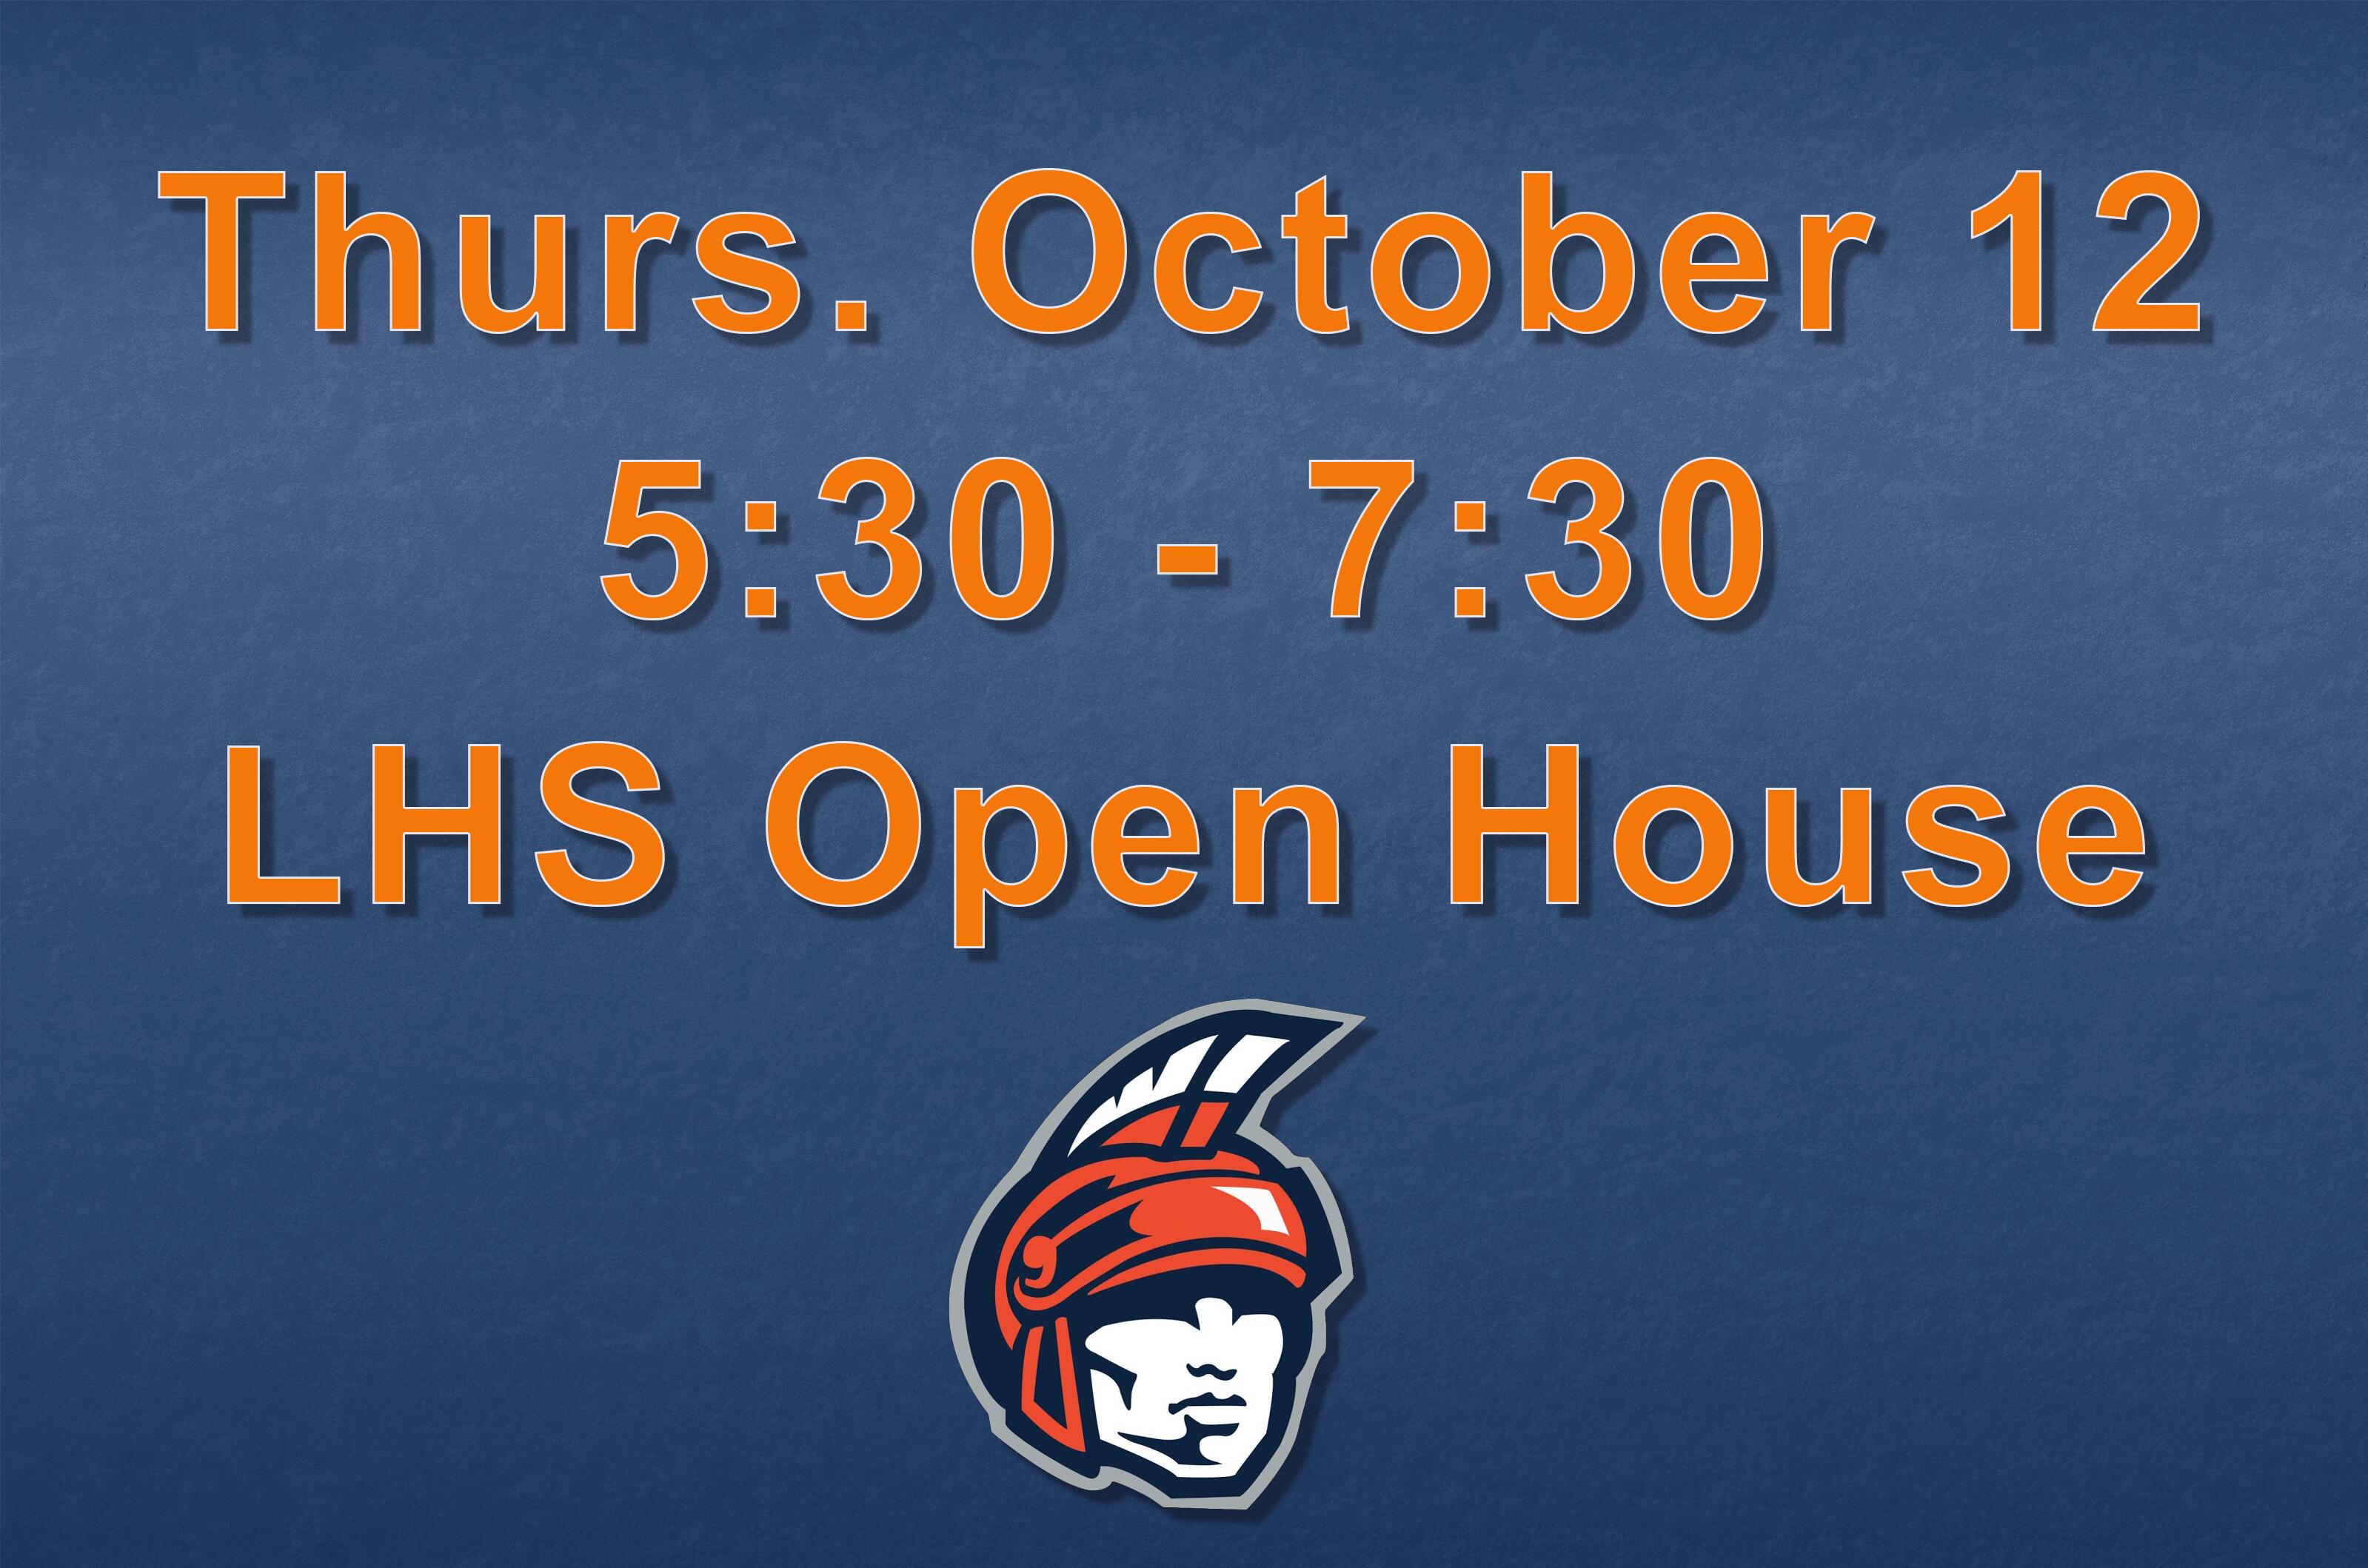 LHS Open House on Thursday, October 12 from 5:30 to 7:30 pm